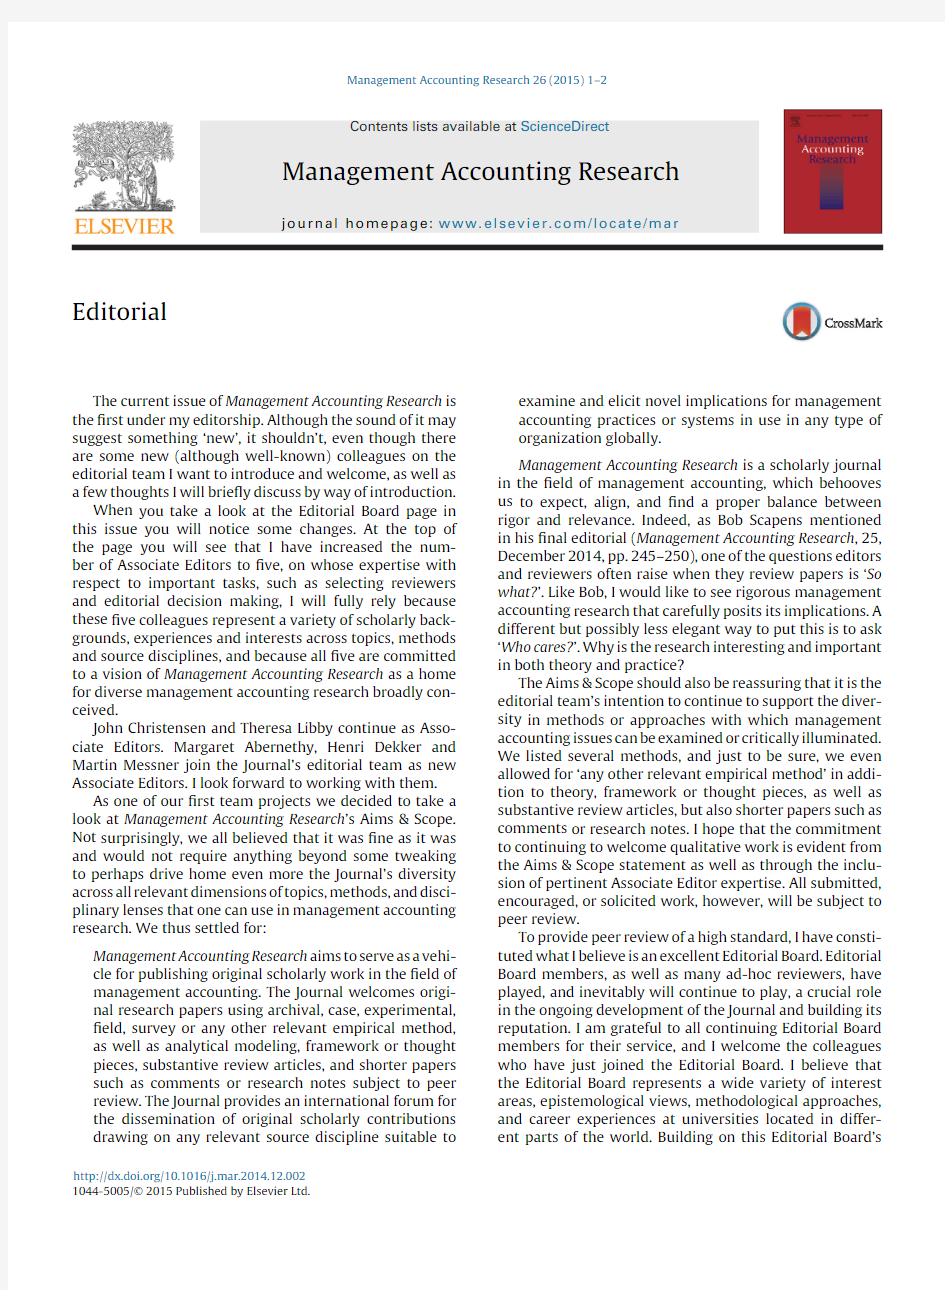 JMAR 杂志Editorial_2015_Management-Accounting-Research